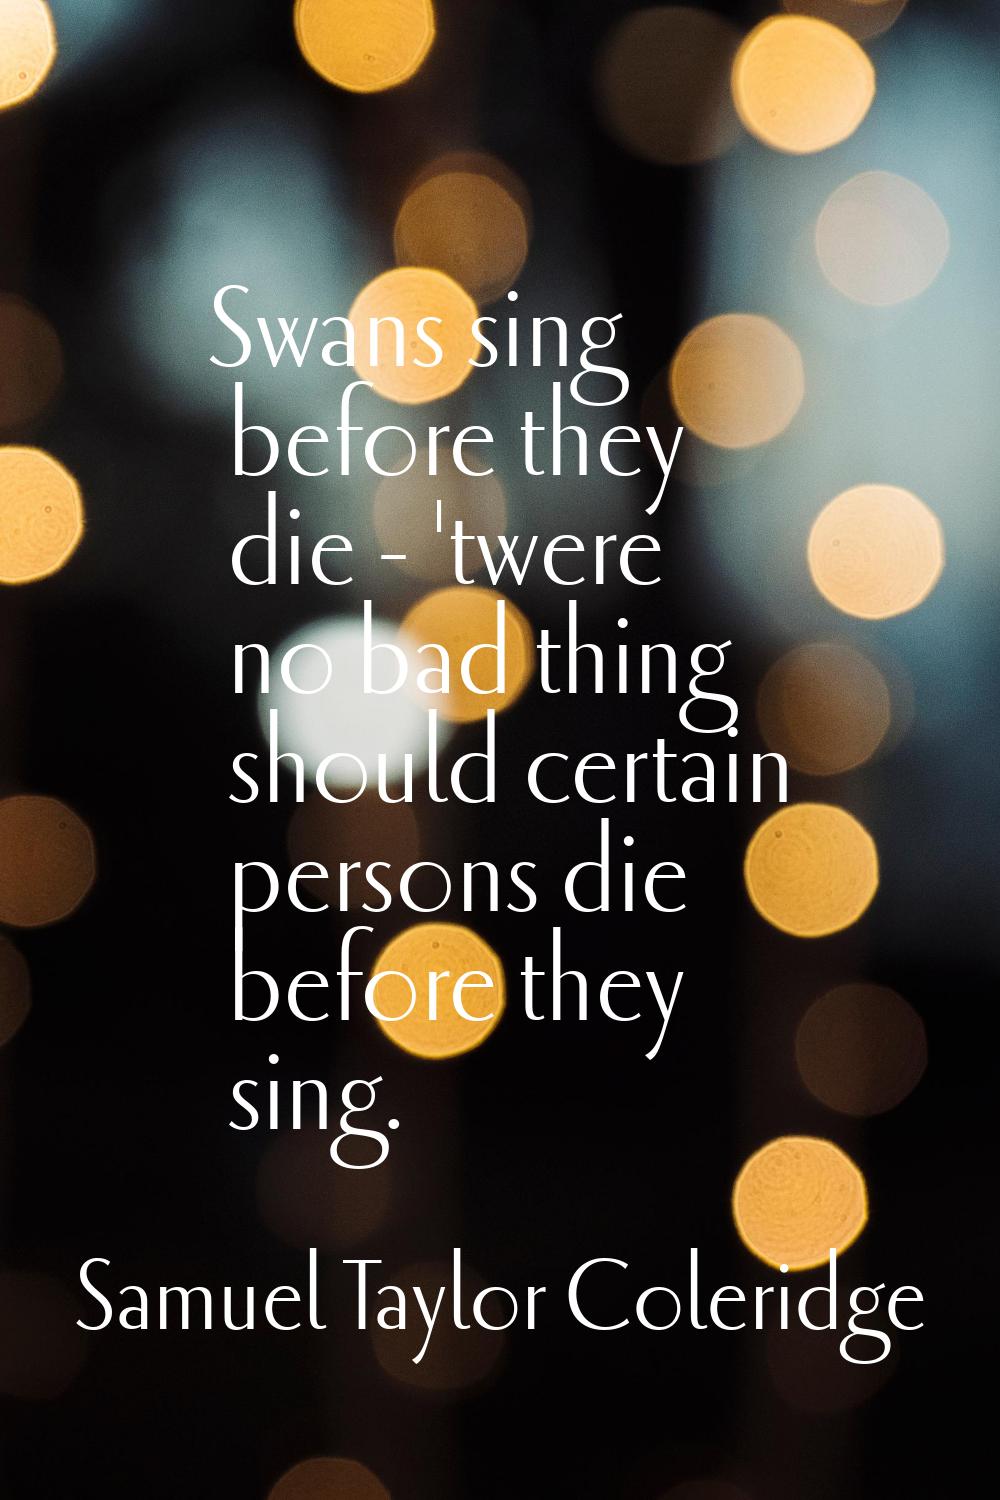 Swans sing before they die - 'twere no bad thing should certain persons die before they sing.